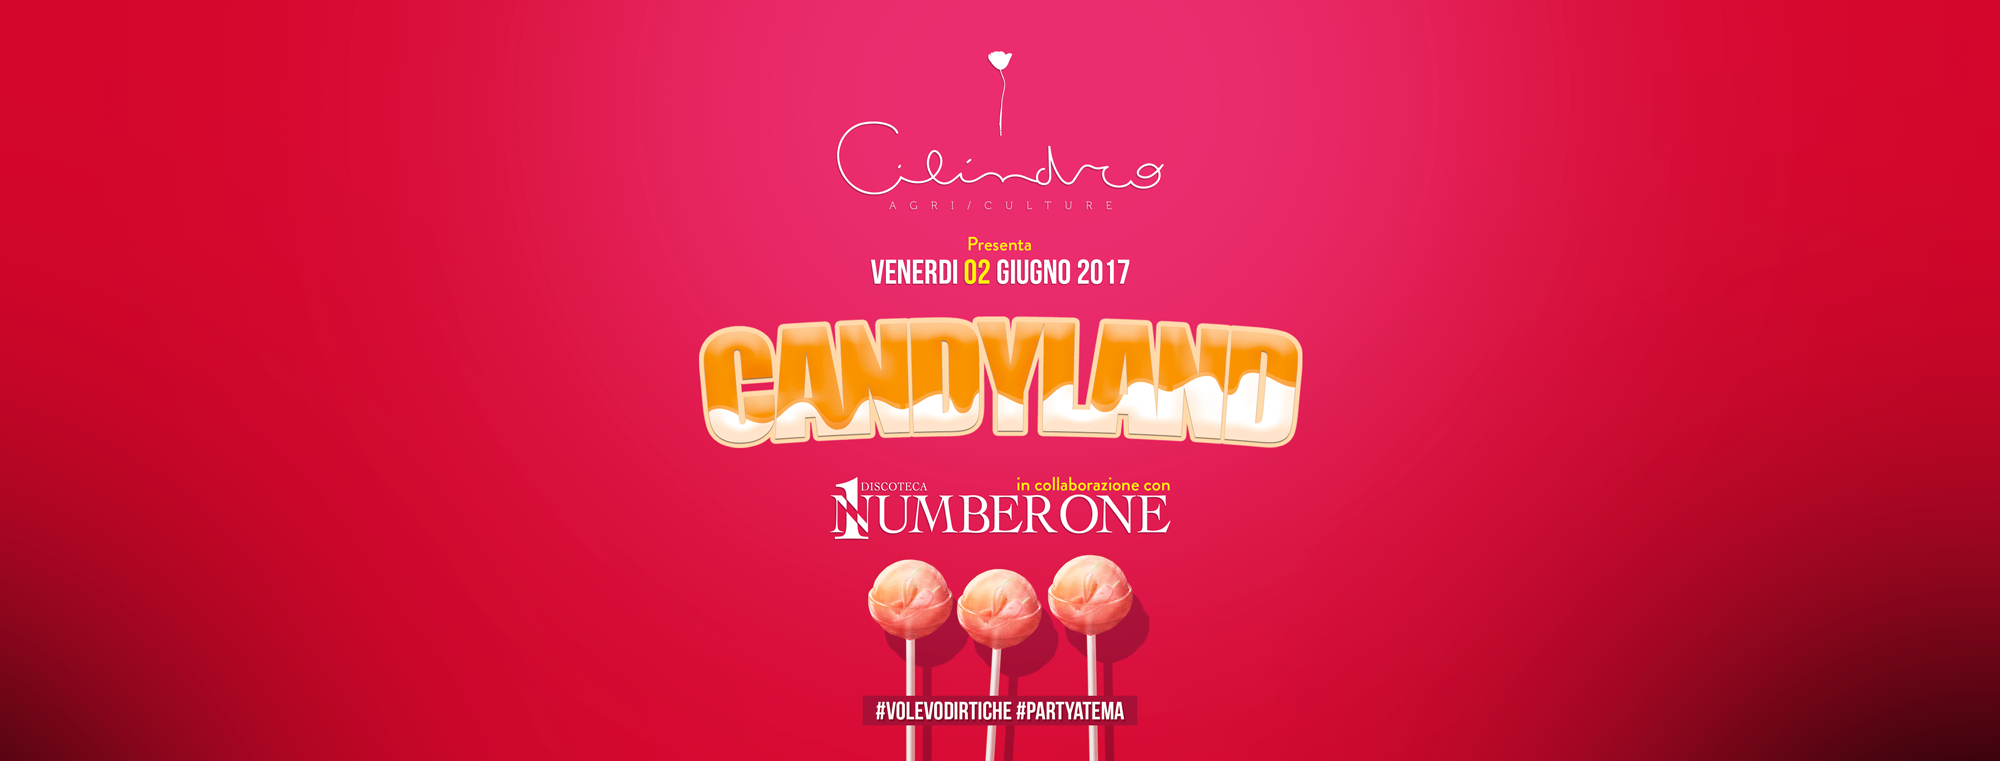 Cilindro 02.06.2017 Candyland – The Sweetest Party in Town